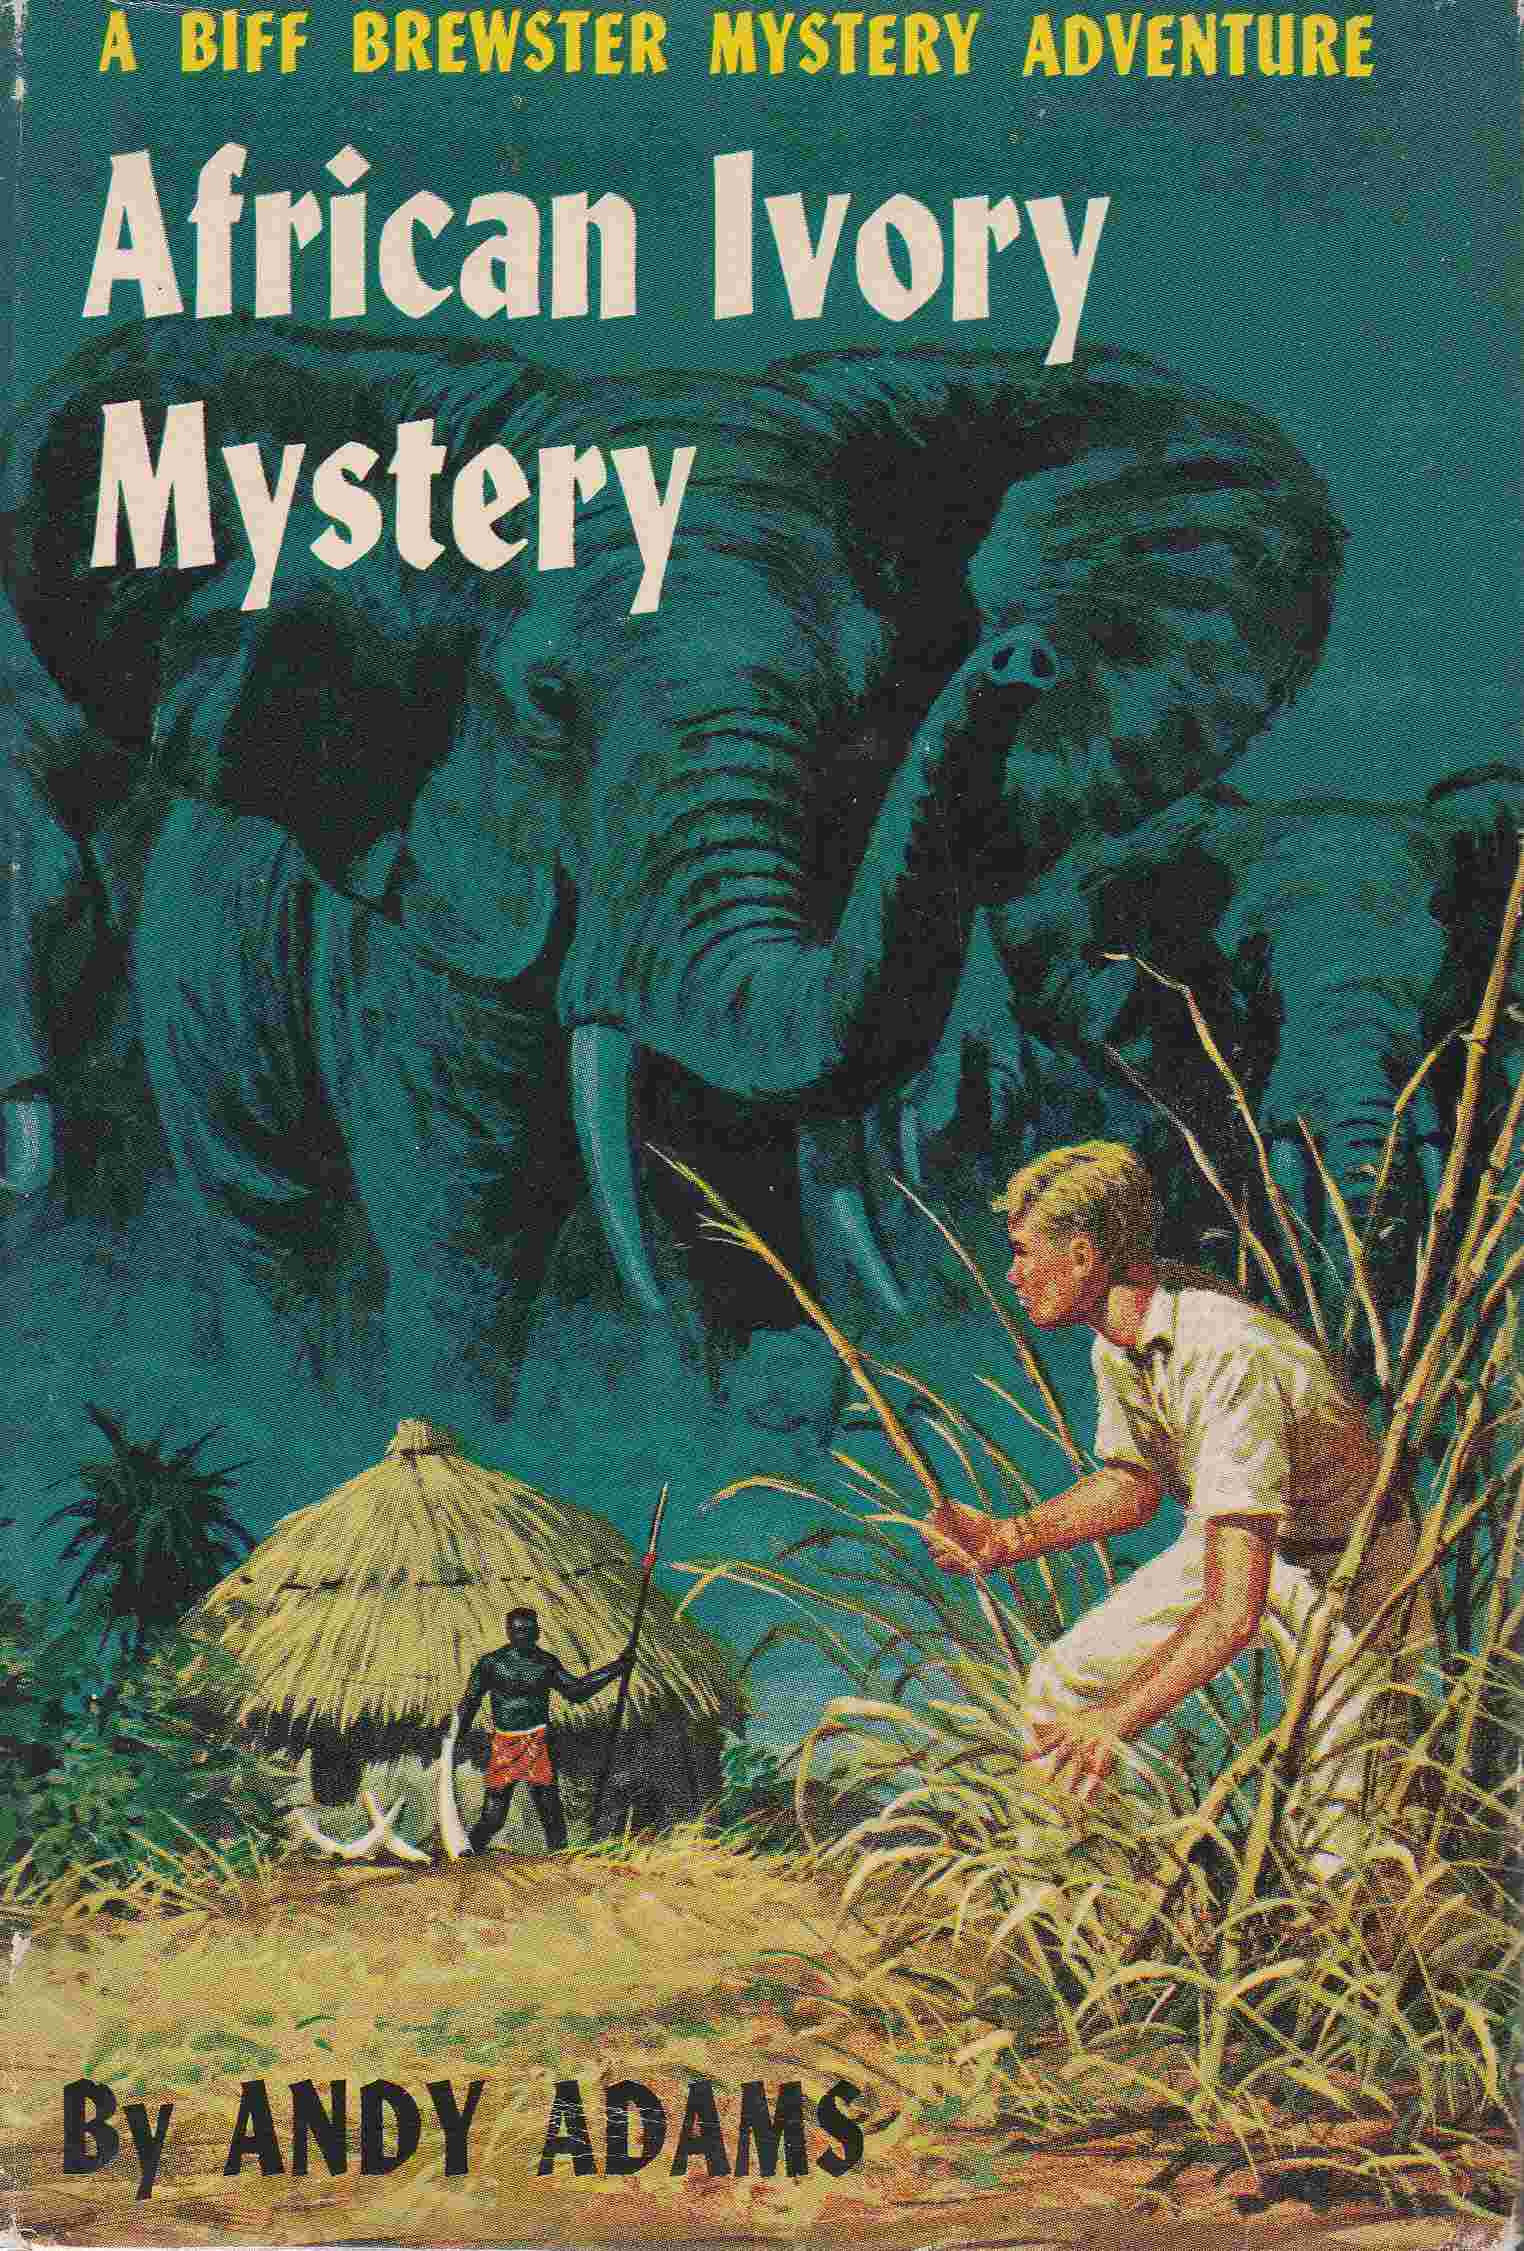 African Ivory Mystery